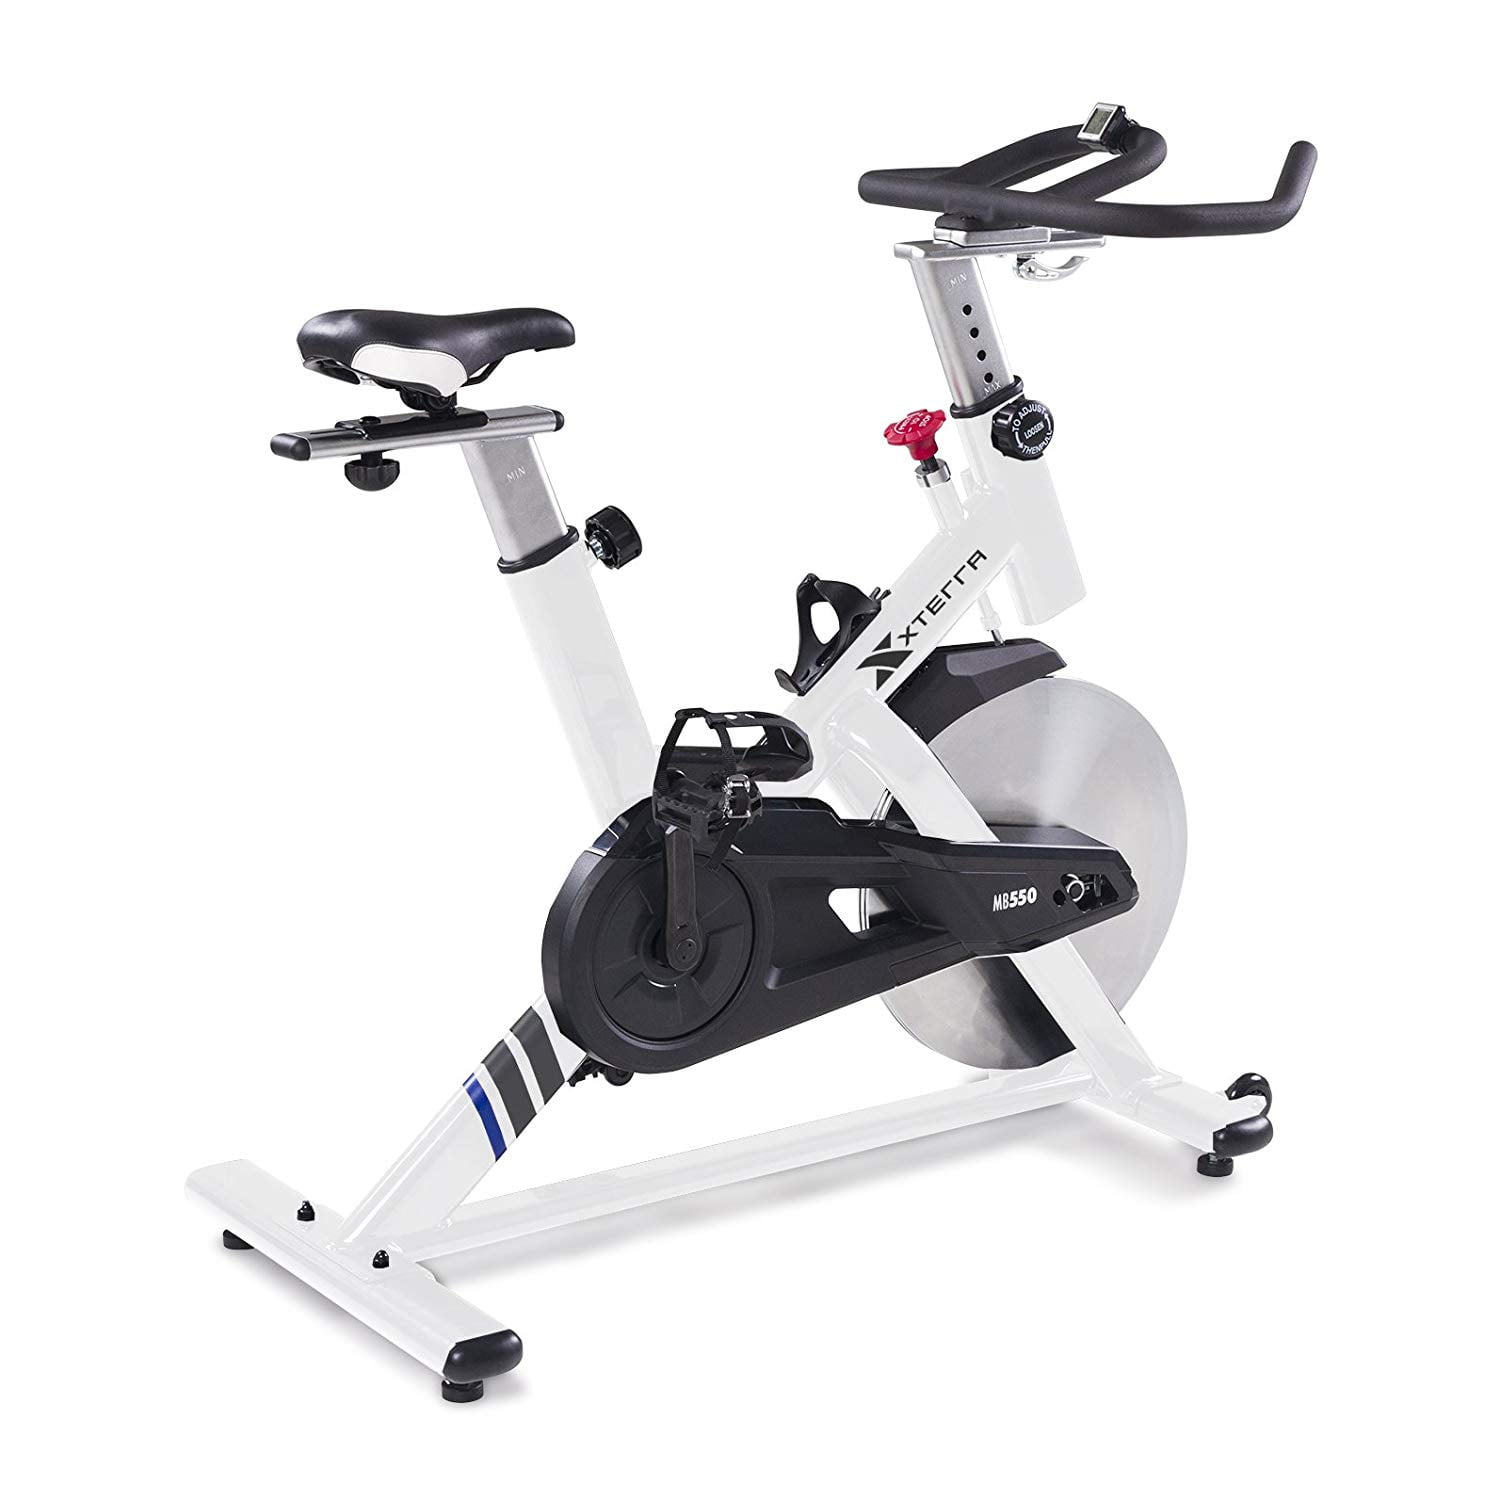 XTERRA Fitness MB550 Indoor Cycling Exercise Bike with 48.5 lb Flywheel, Wireless LCD Display, Unlimited Micro-Adjustment Resistance Levels